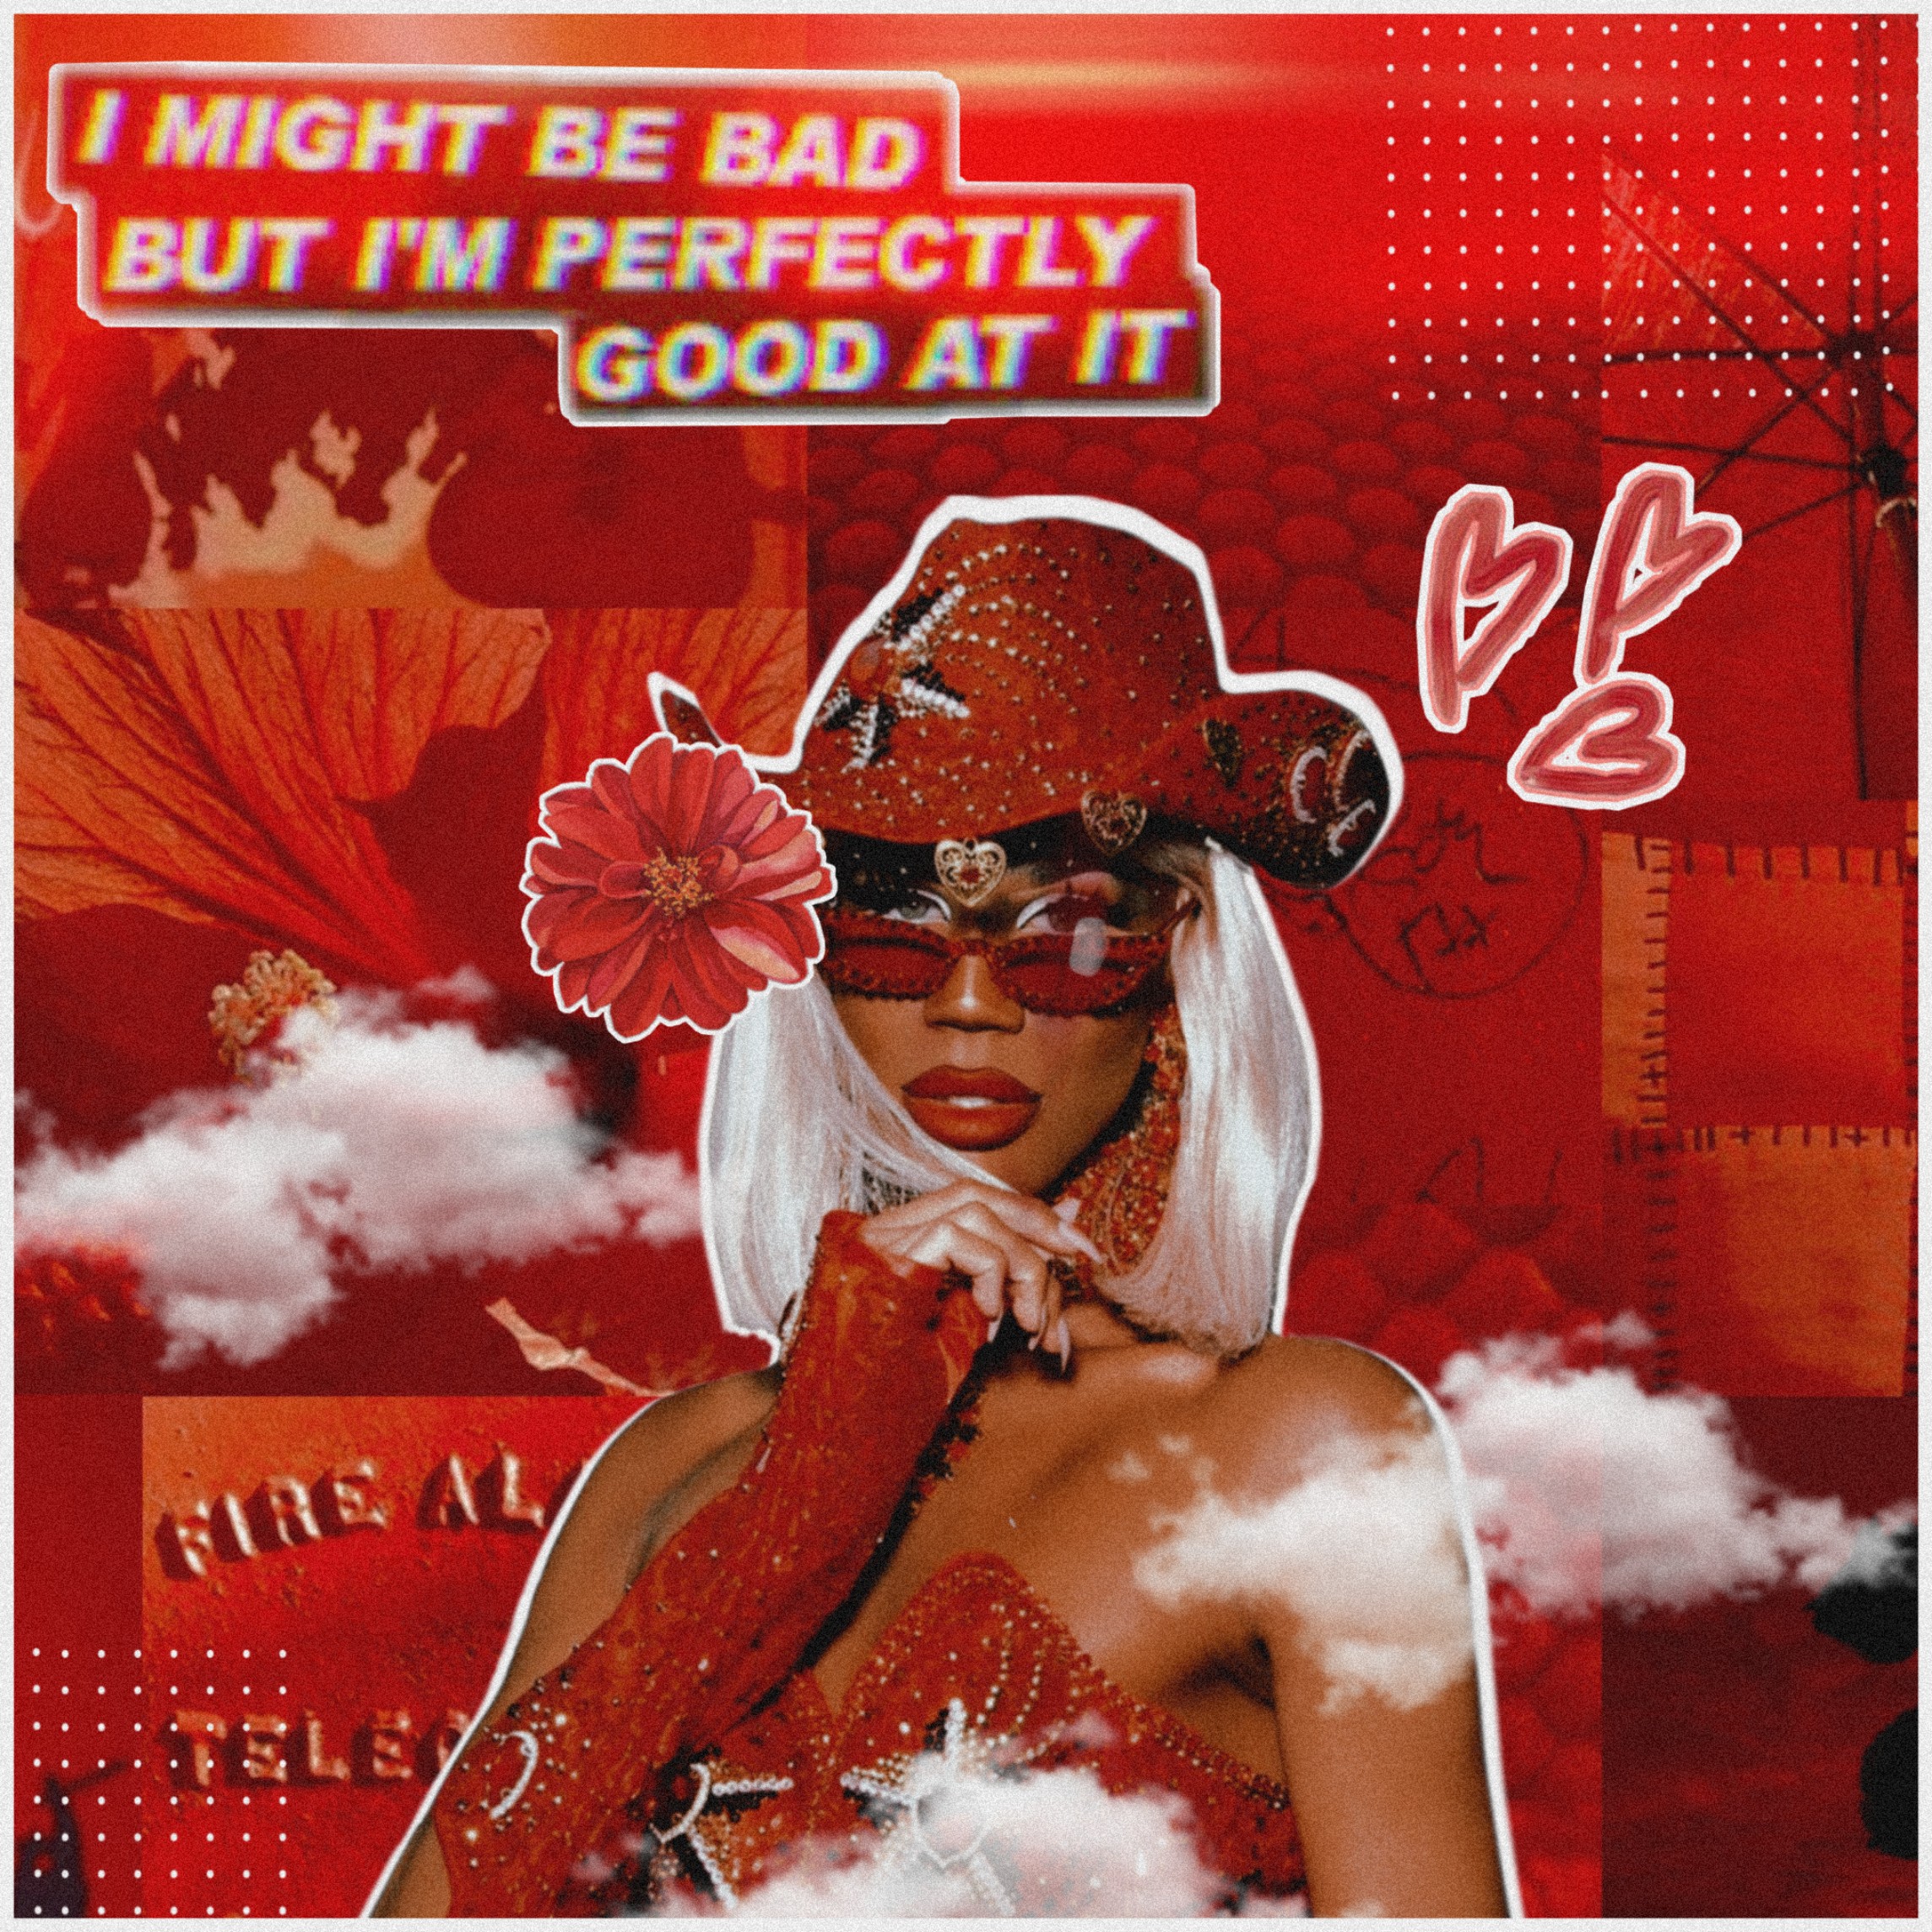 freetoedit Red edit 🌹 ️ red aesthetic redaesthetic aes...